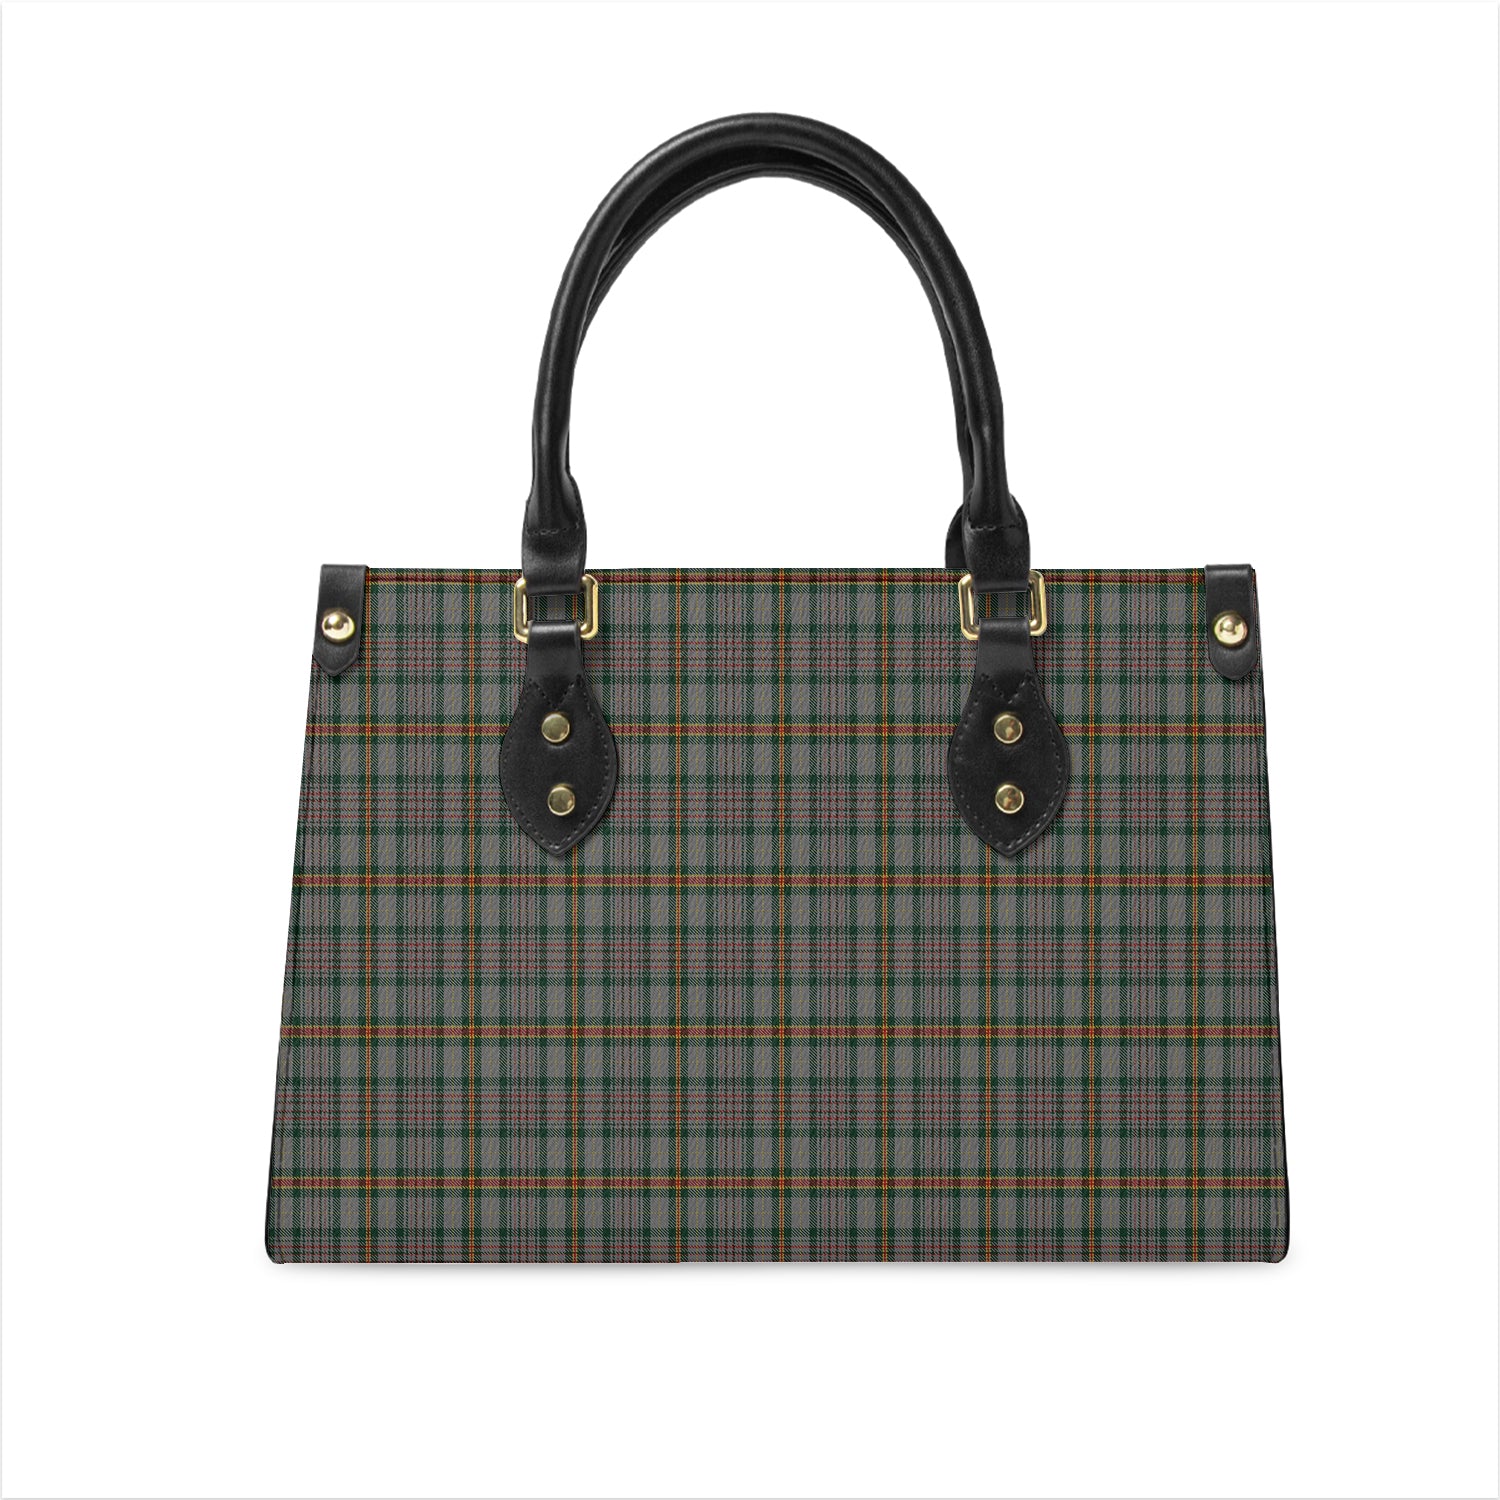 howell-of-wales-tartan-leather-bag